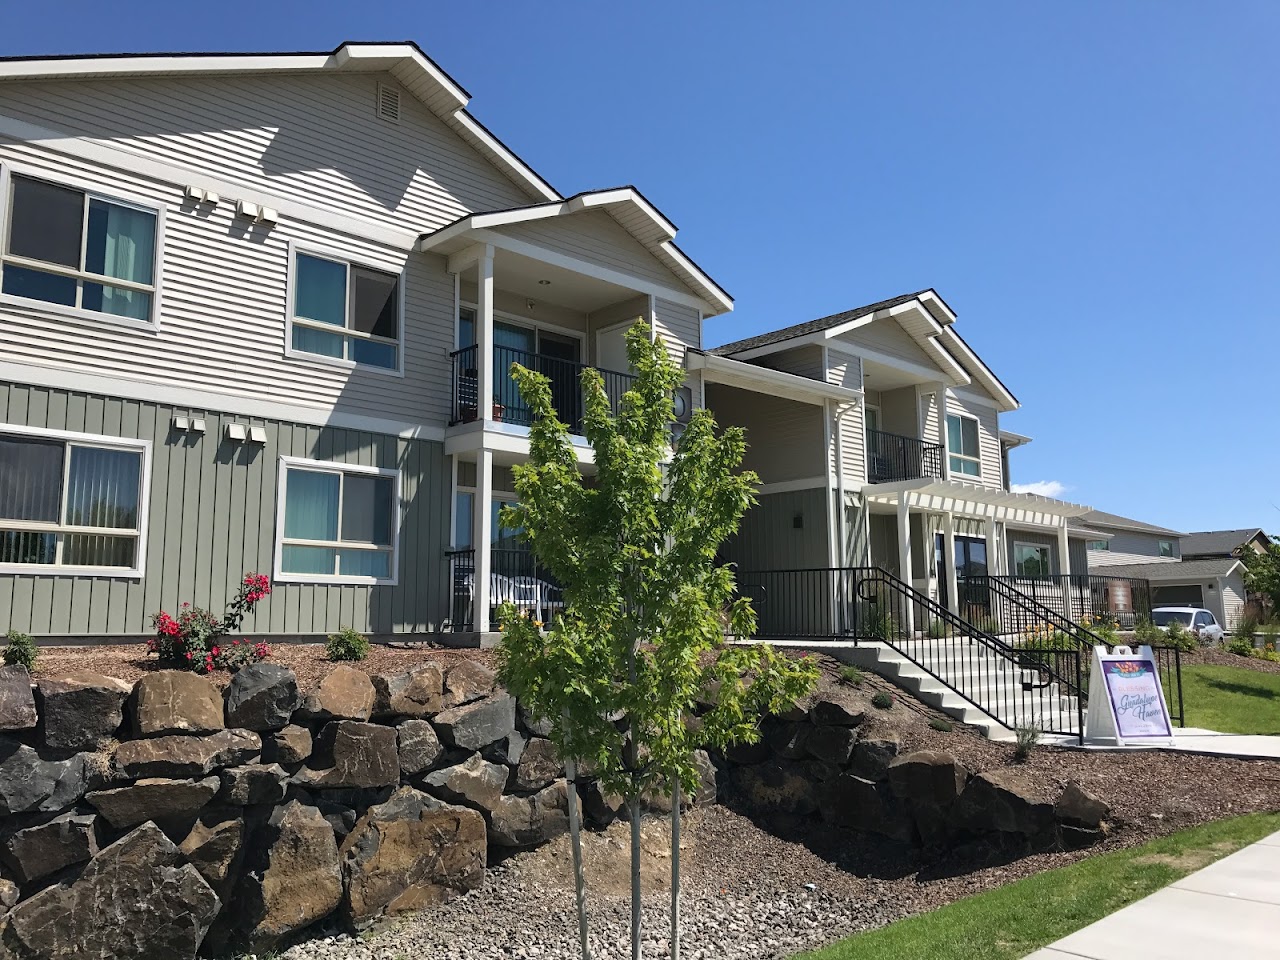 Photo of GUADALUPE HAVEN. Affordable housing located at 705 E GEMSTONE OTHELLO, WA 99344